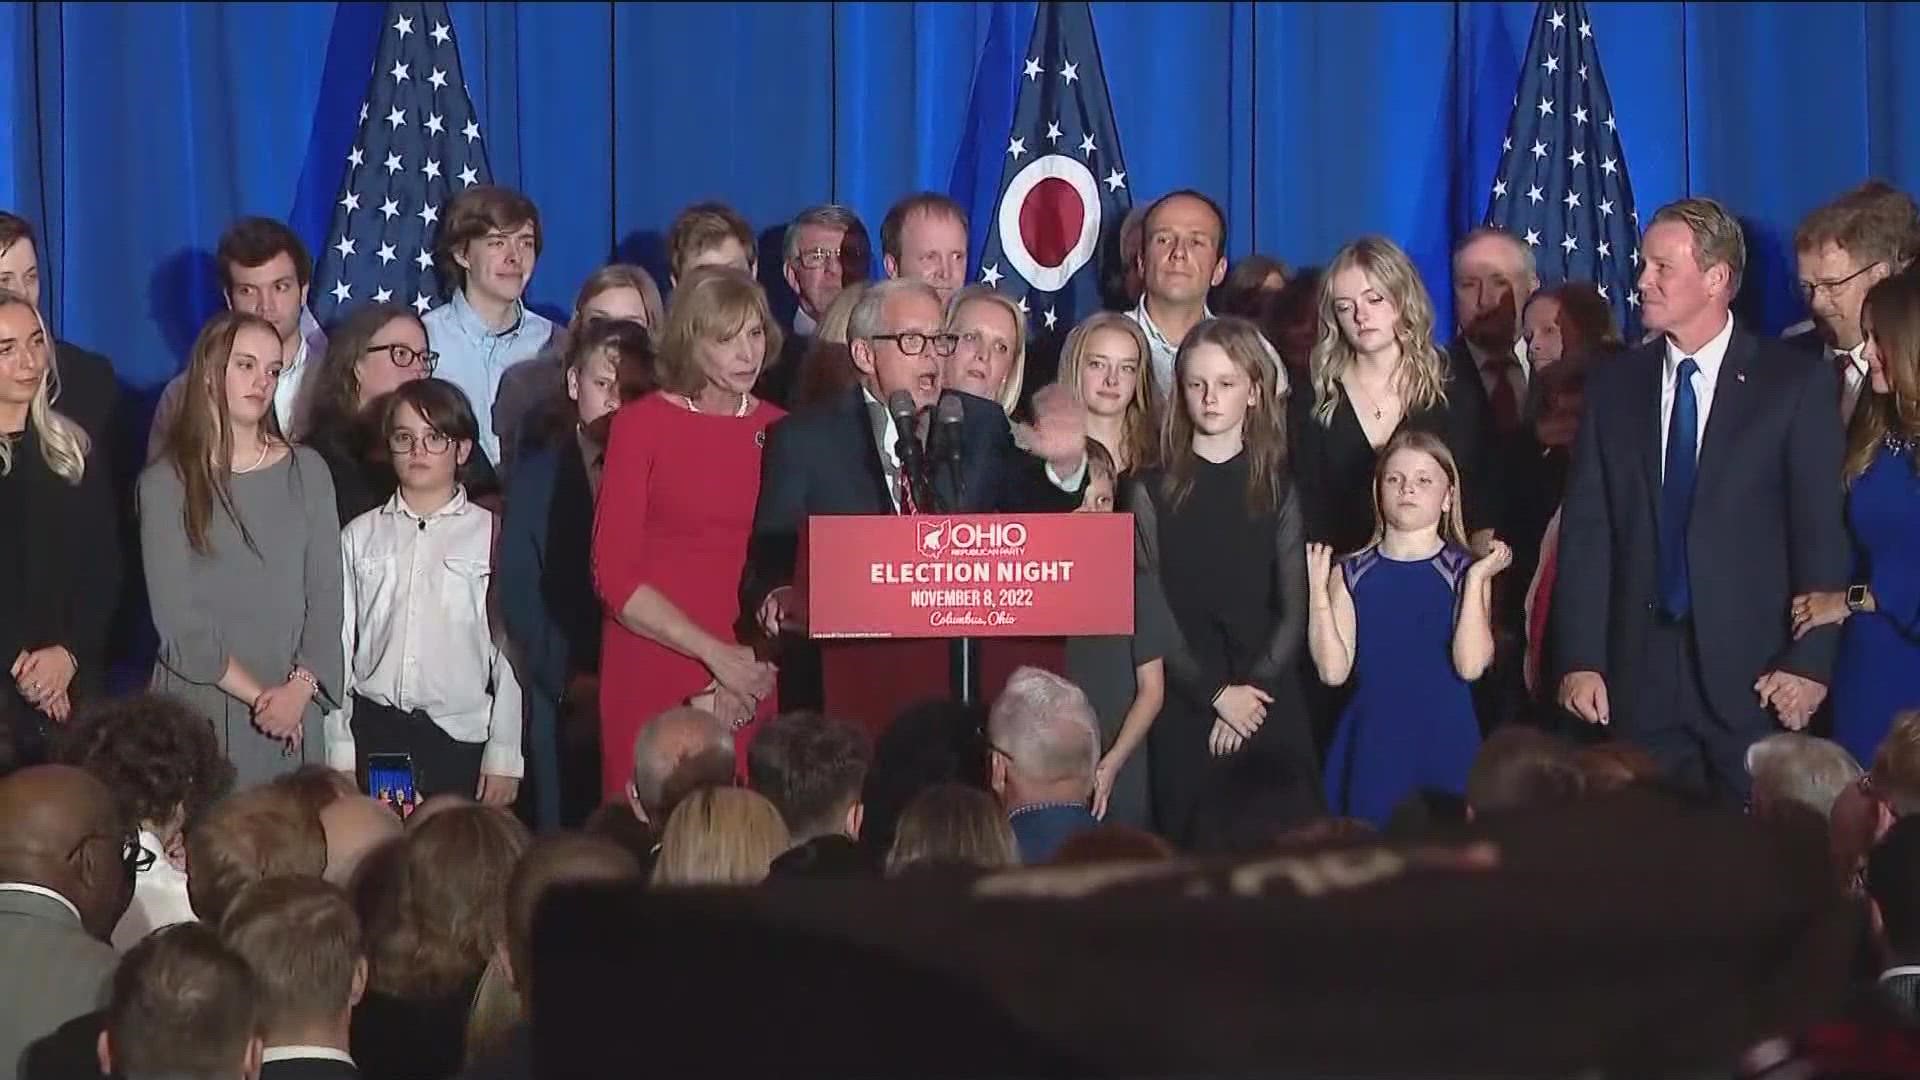 The incumbent Republican governor Mike DeWine has won a second term, defeating former Dayton mayor Nan Whaley.